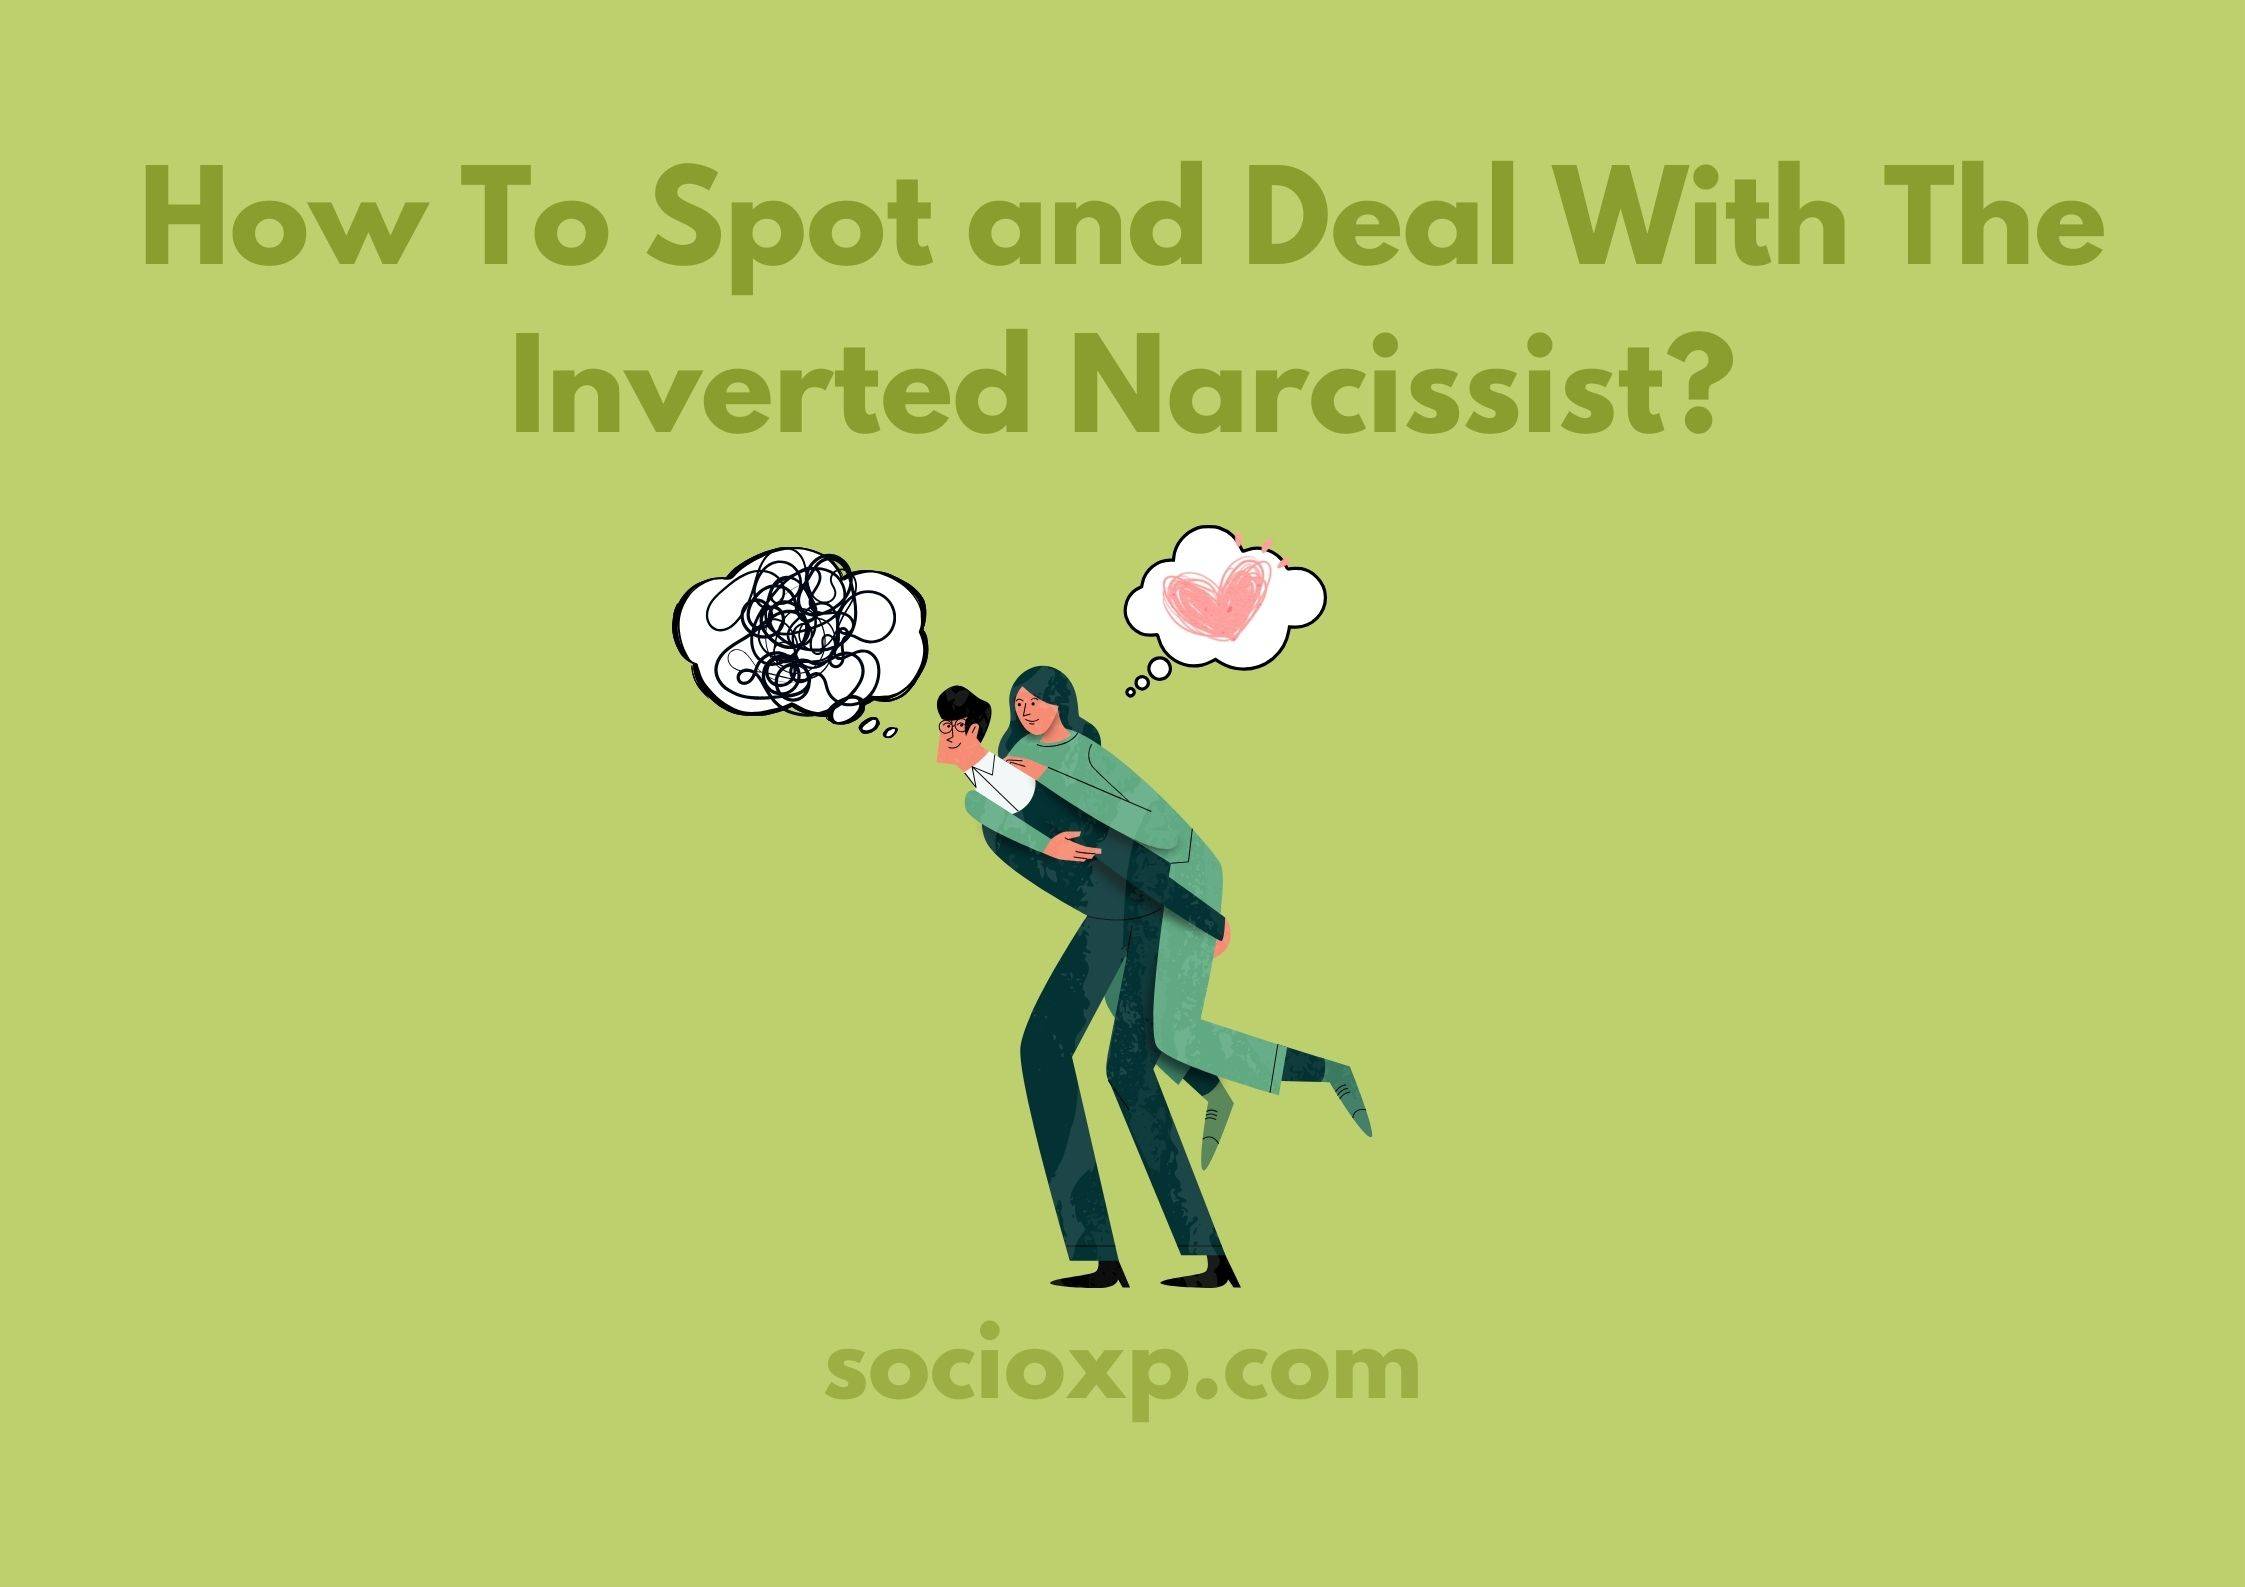 How To Spot and Deal With The Inverted Narcissist?